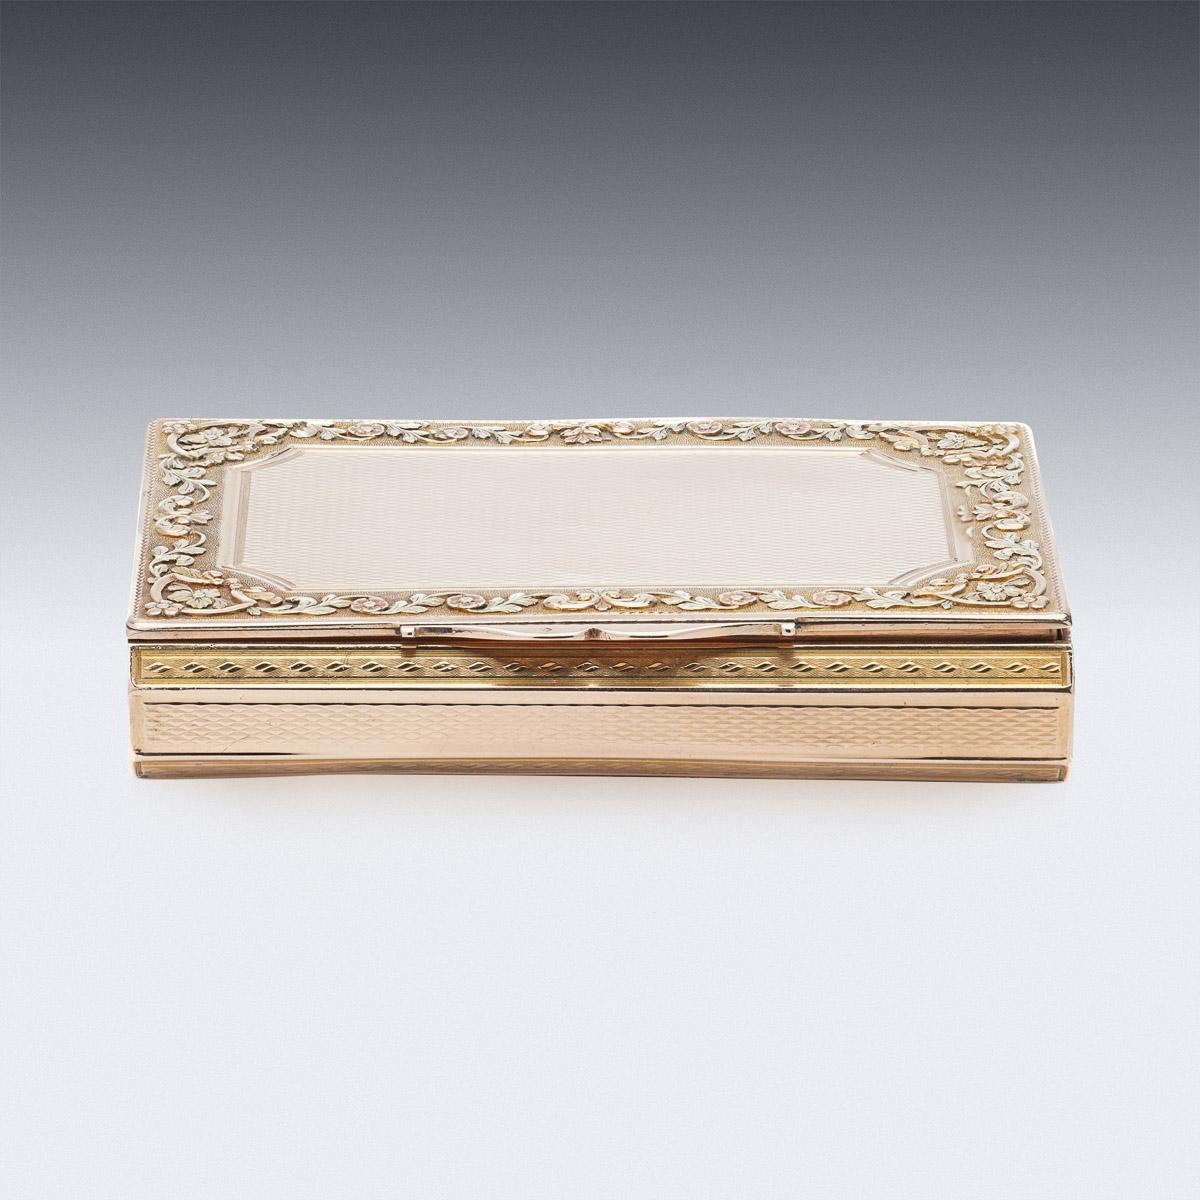 Antique 19th Century French three-colour 18K solid gold snuff box, of rectangular form, sides chased with floral bands on a sablé ground, the central panels with engine-turned decoration and lid mounted with a shaped thumb-piece. Hallmarked with